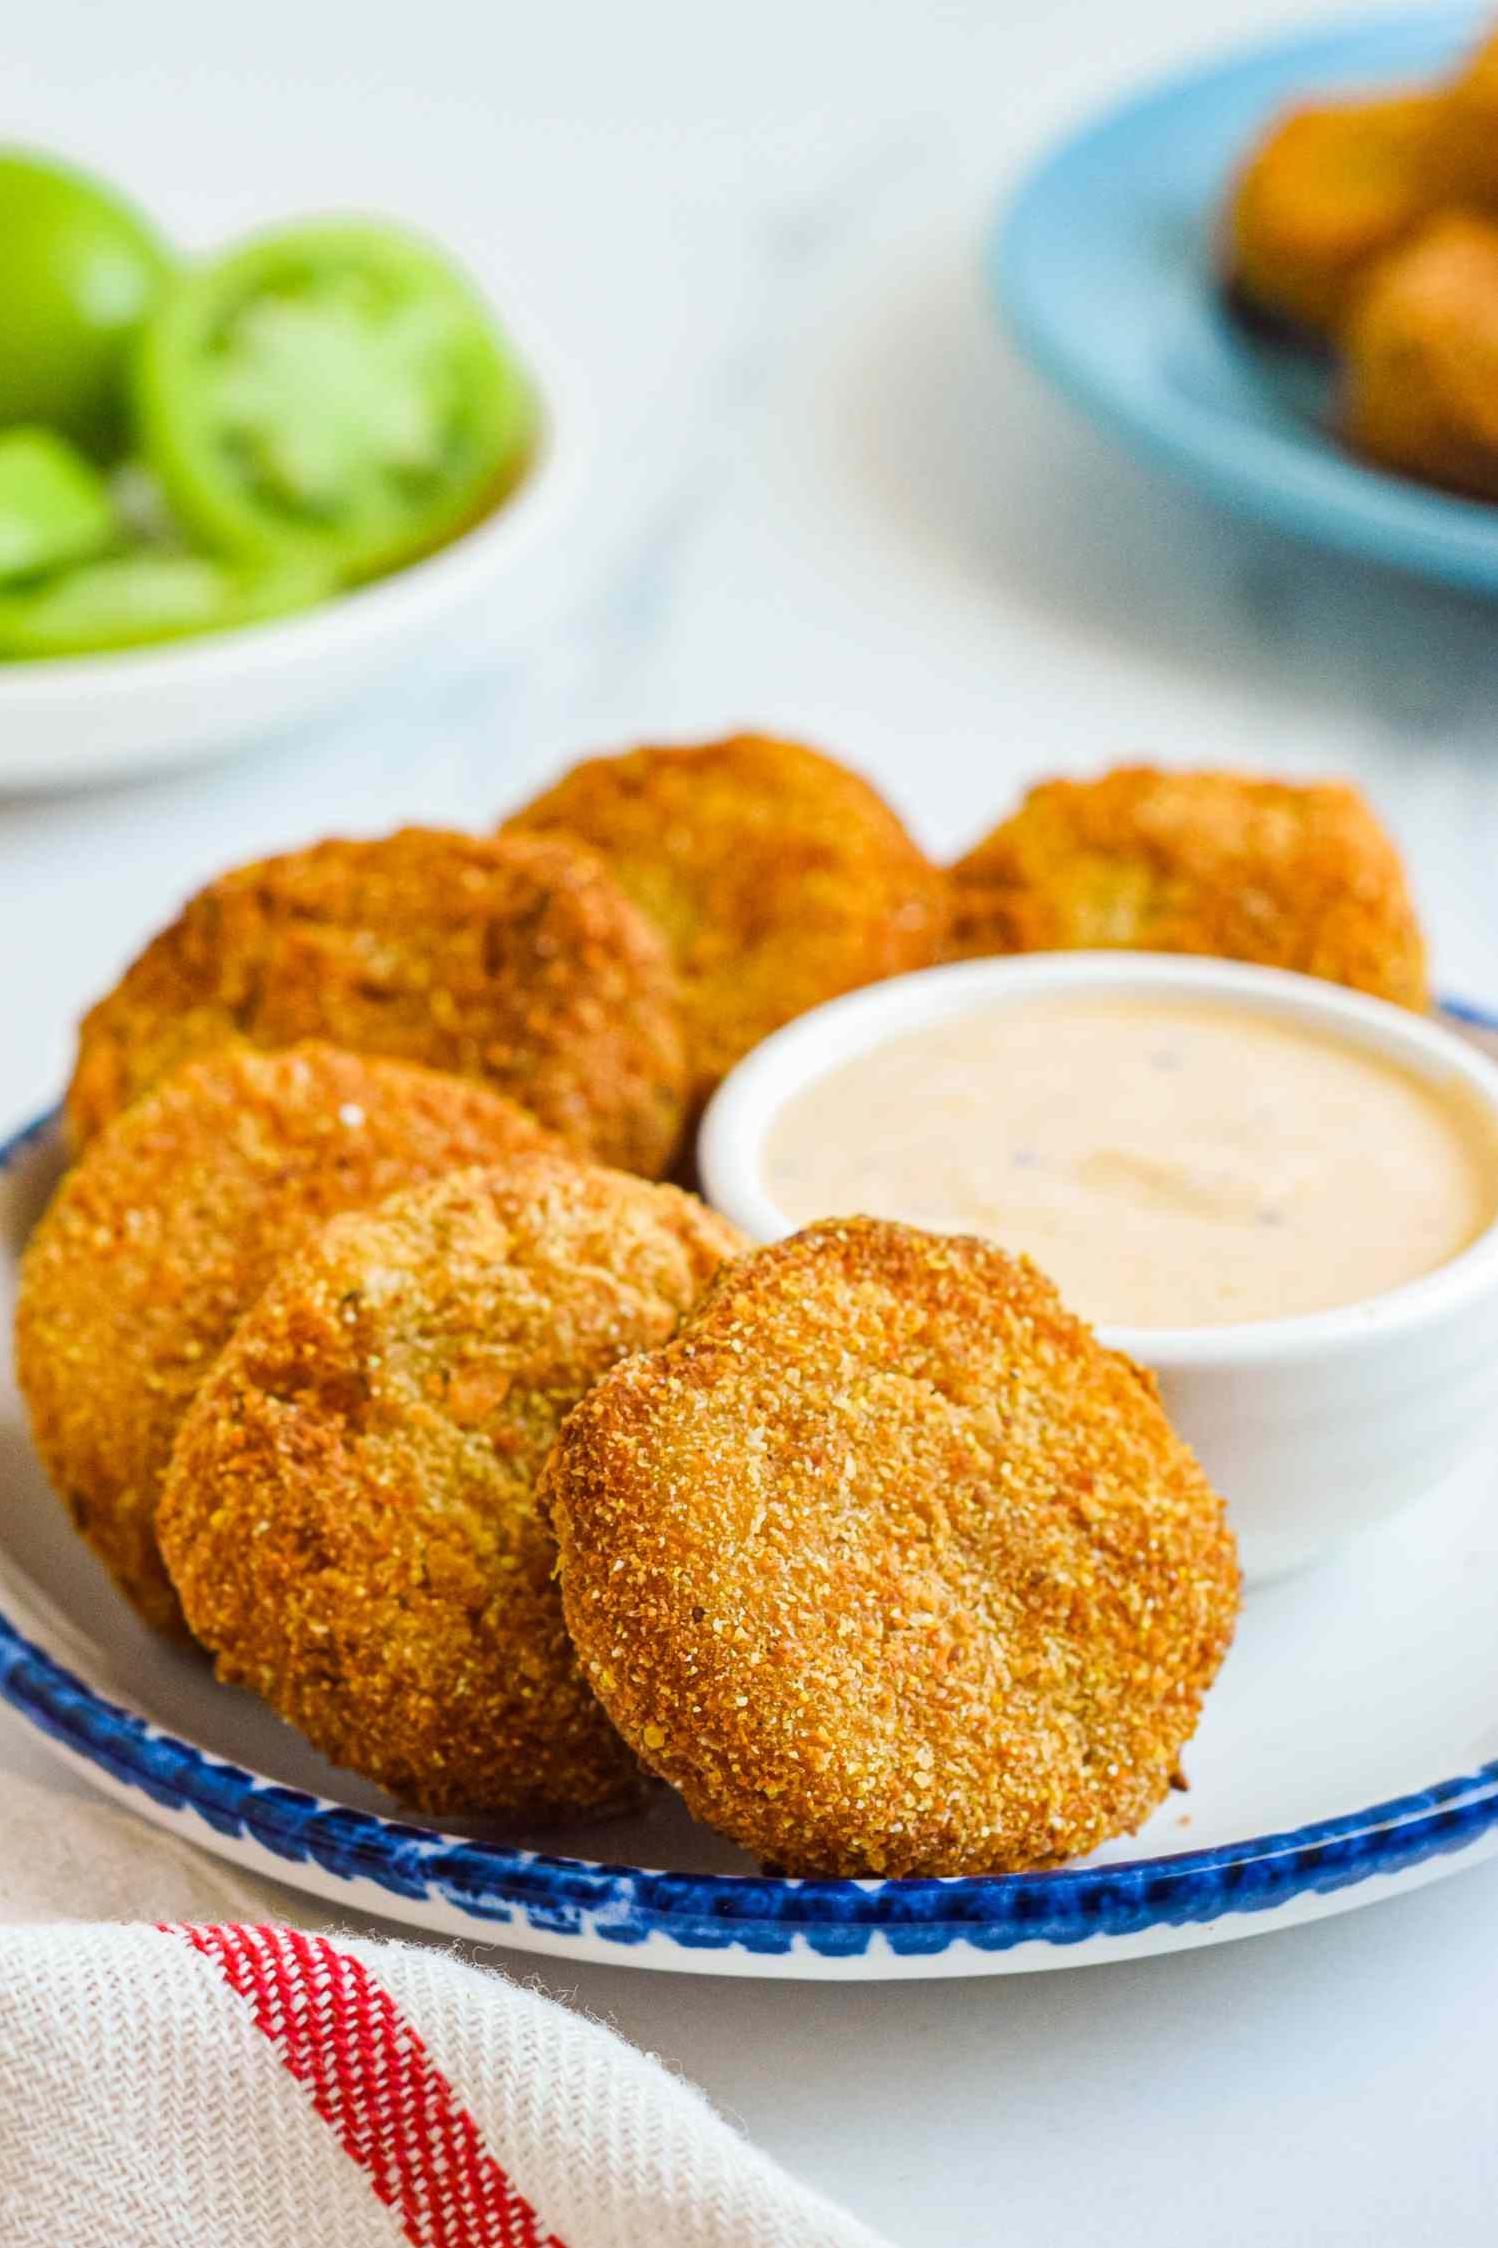  Thick slices of unripe green tomatoes dipped in a flavorful buttermilk and cornmeal batter.